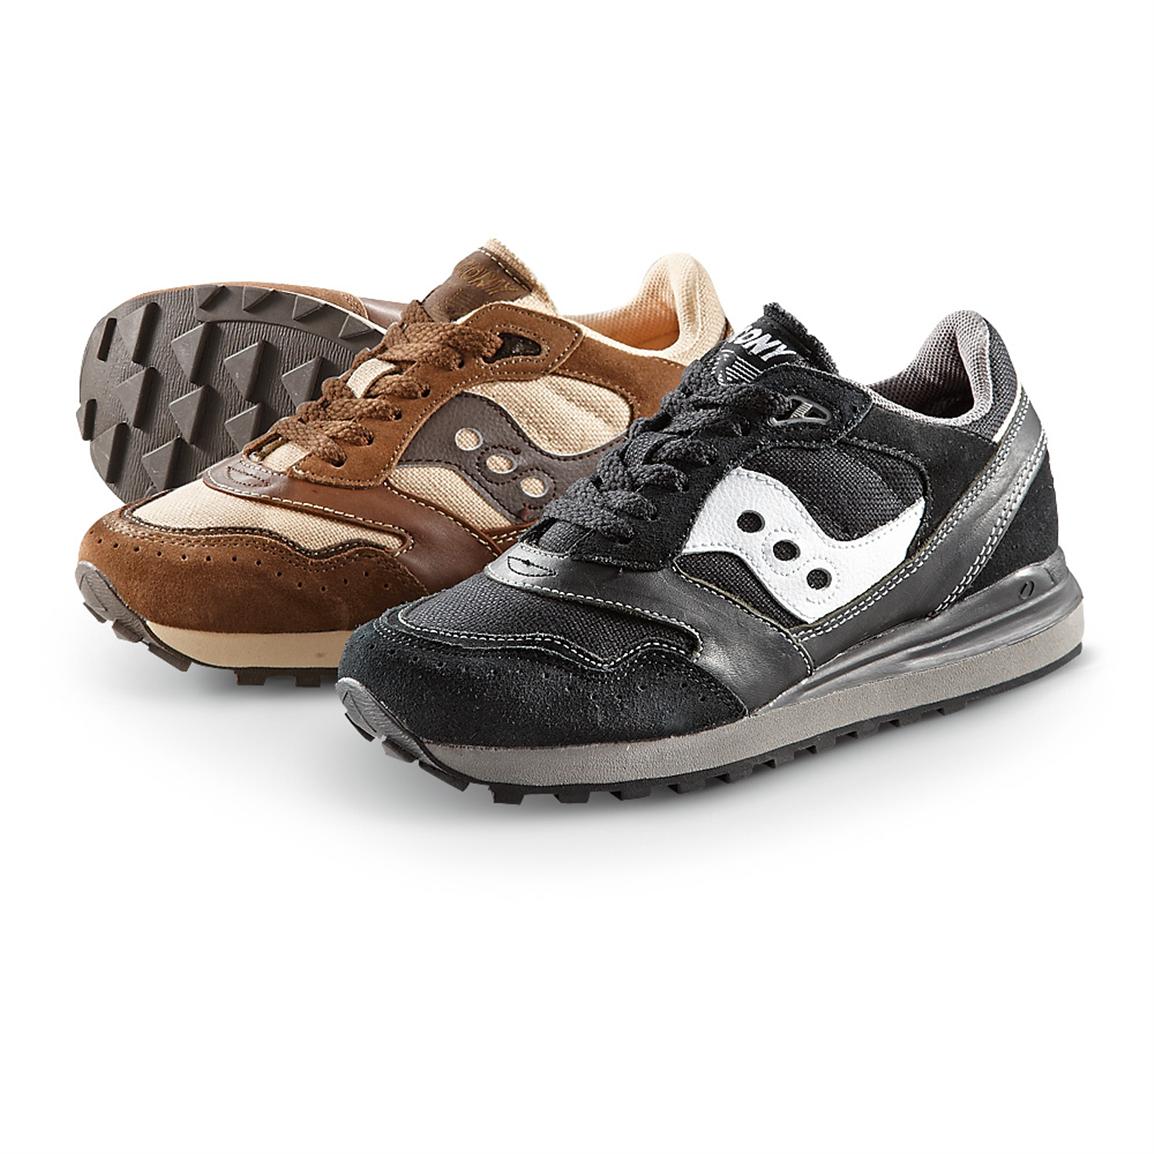 saucony leather shoes online